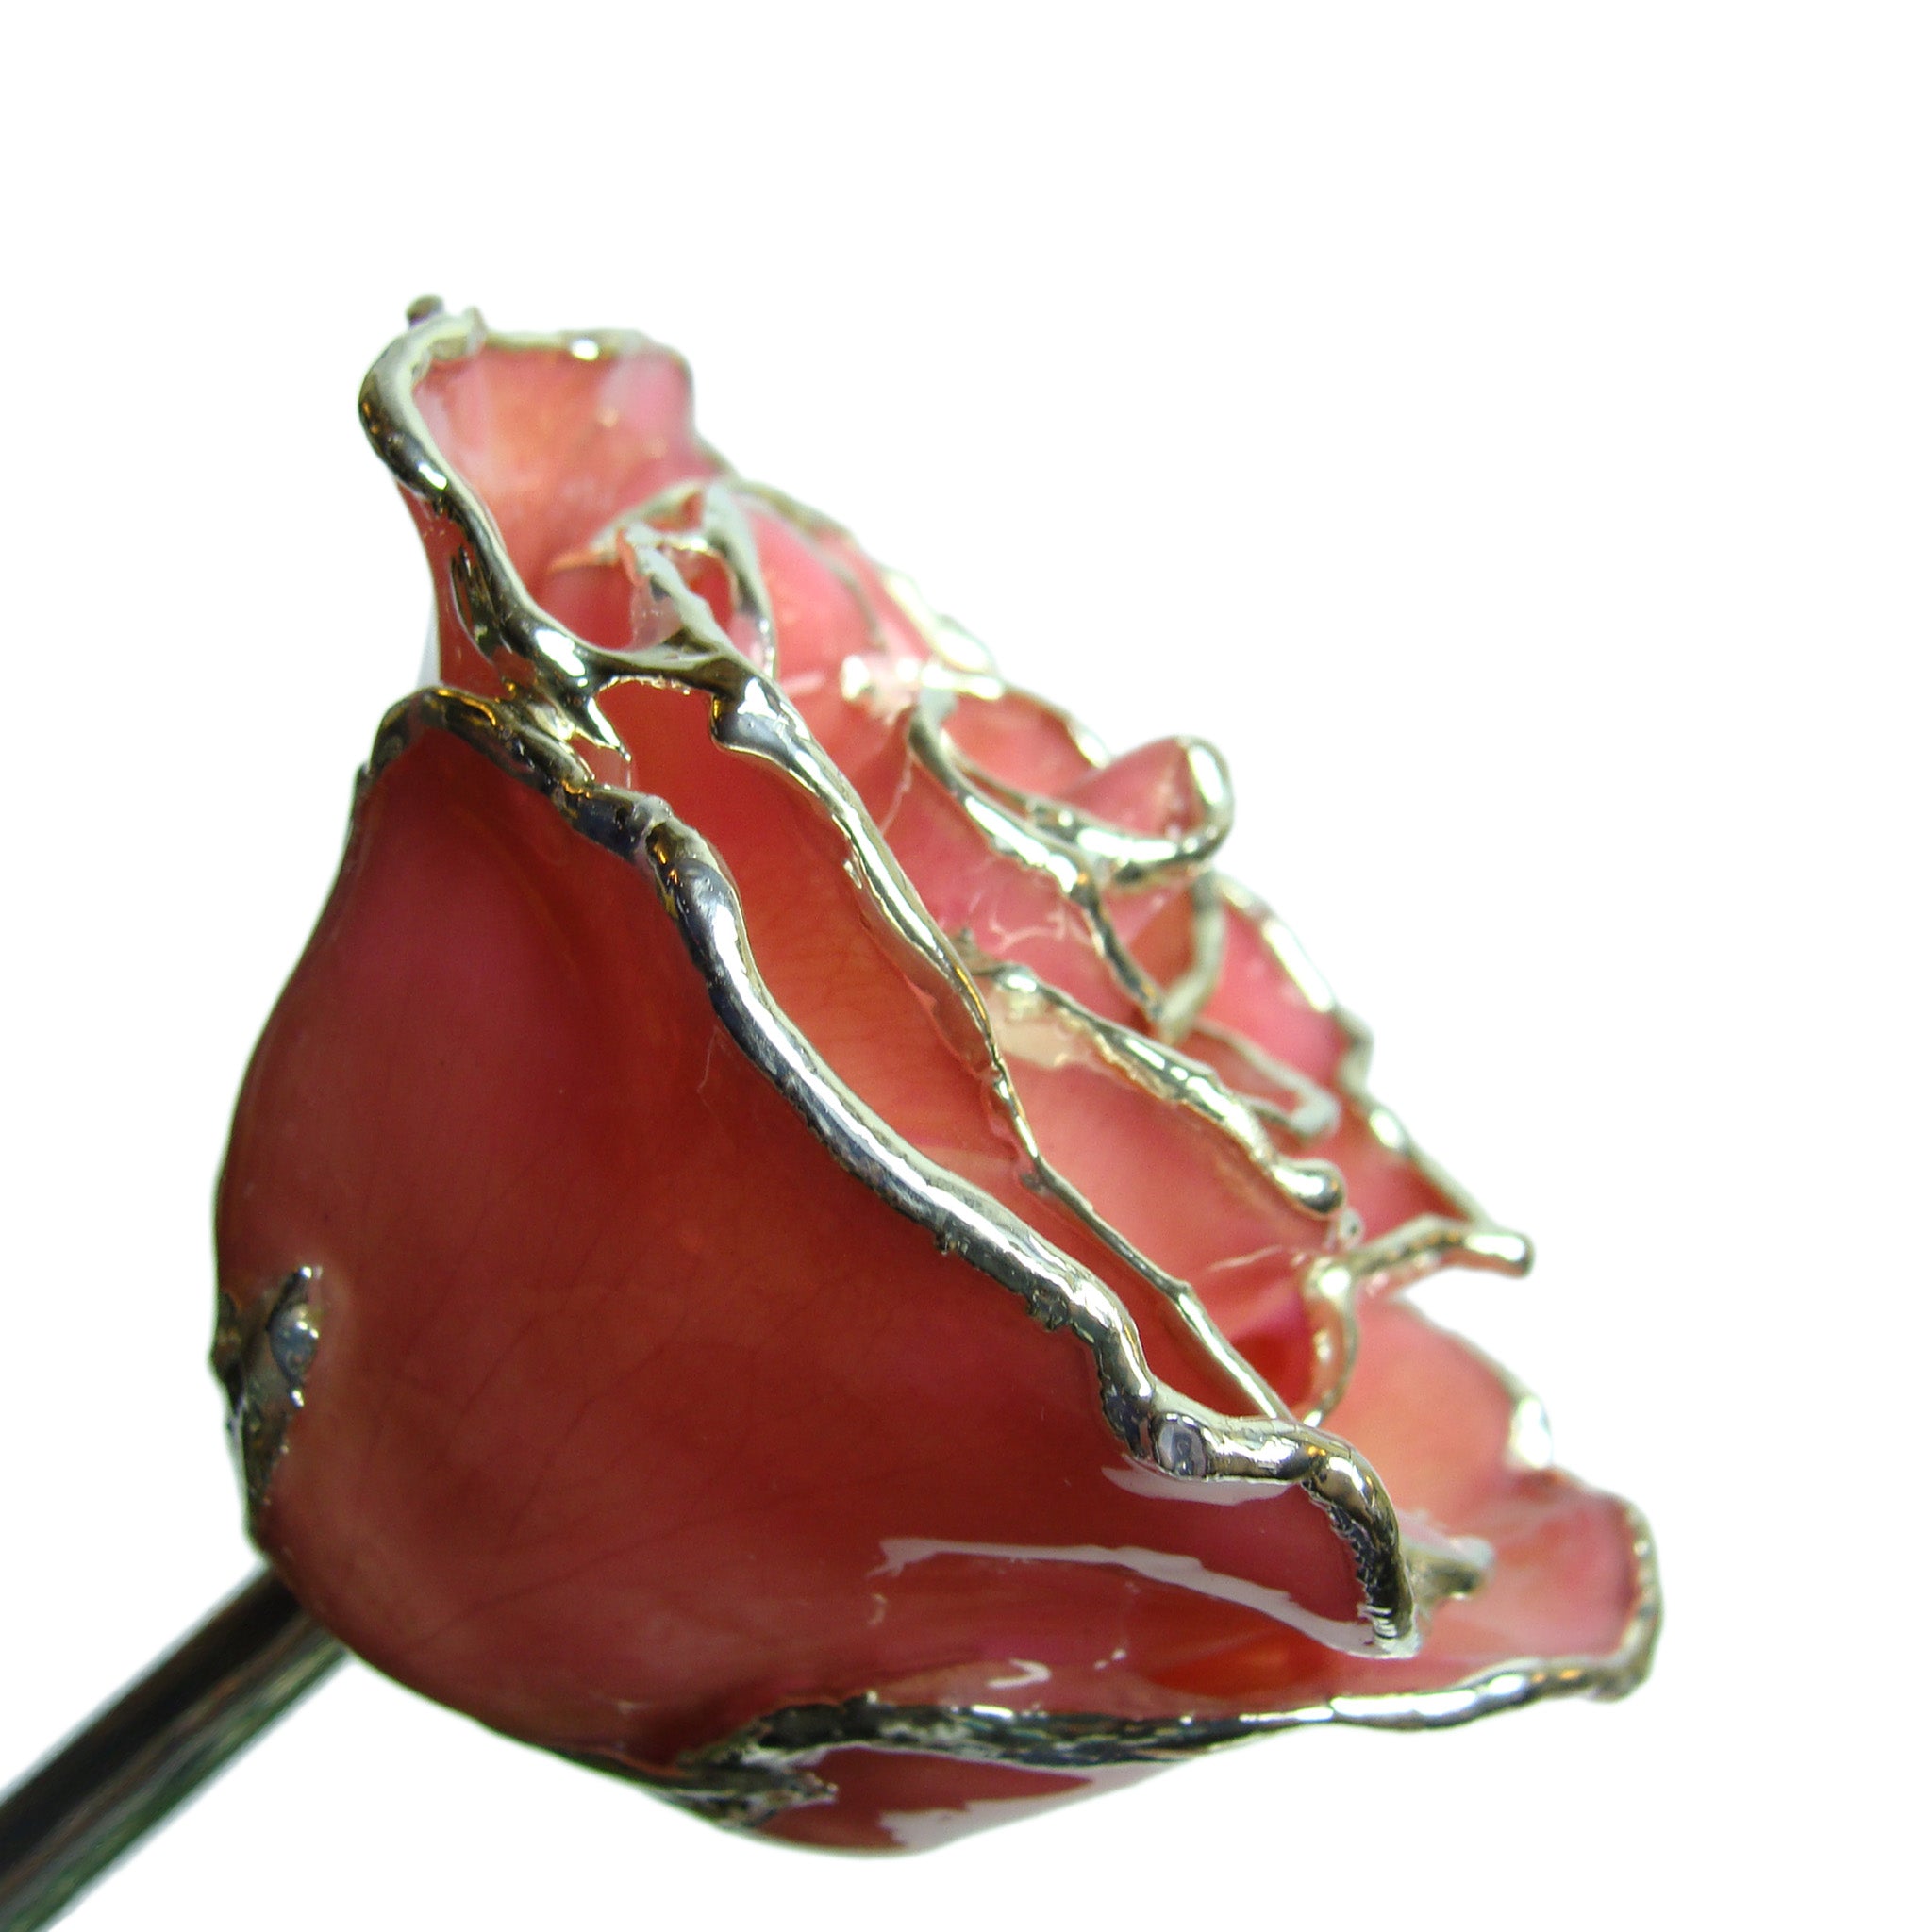 Silver Trimmed Forever Rose with Pink Petals. View of Stem, Leaves, and Rose Petals and Showing Detail of Silver Trim